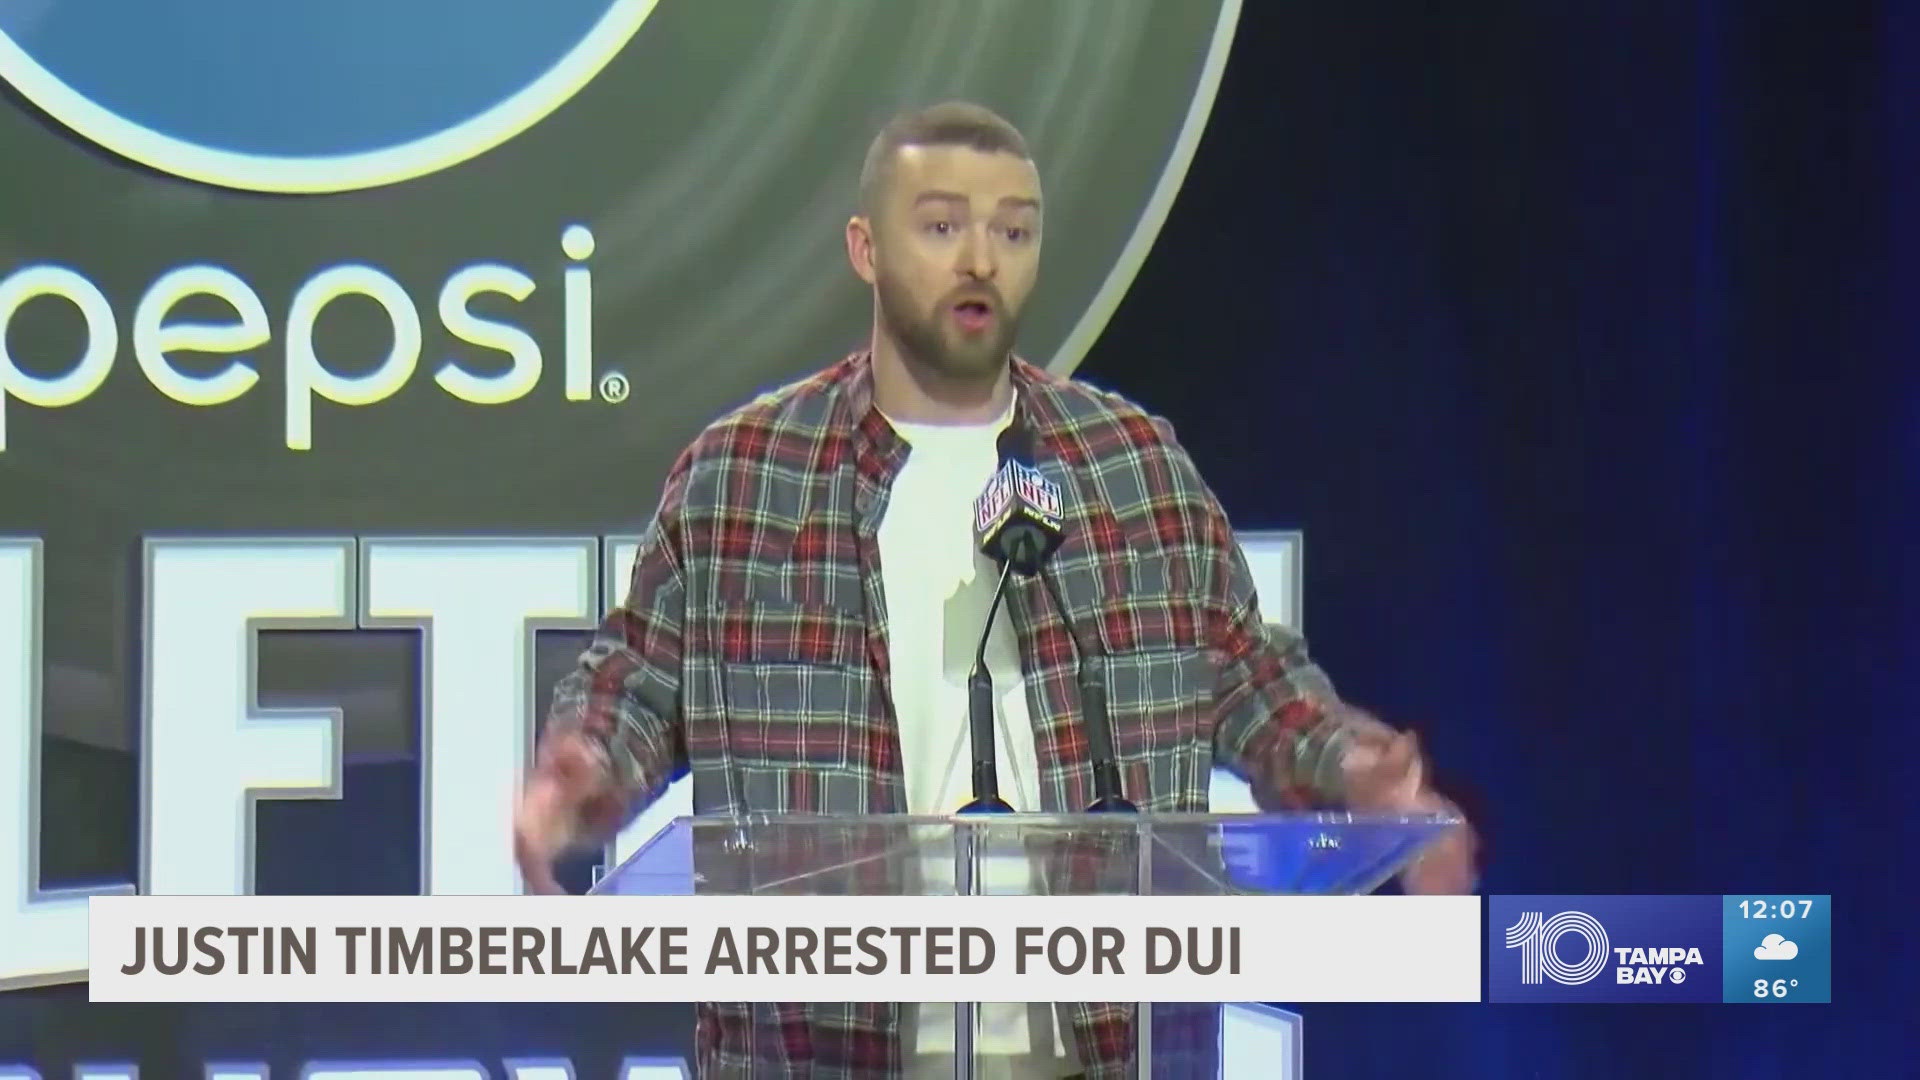 Timberlake was arrested in Sag Harbor, a coastal village in the Hamptons, around 100 miles from New York City.